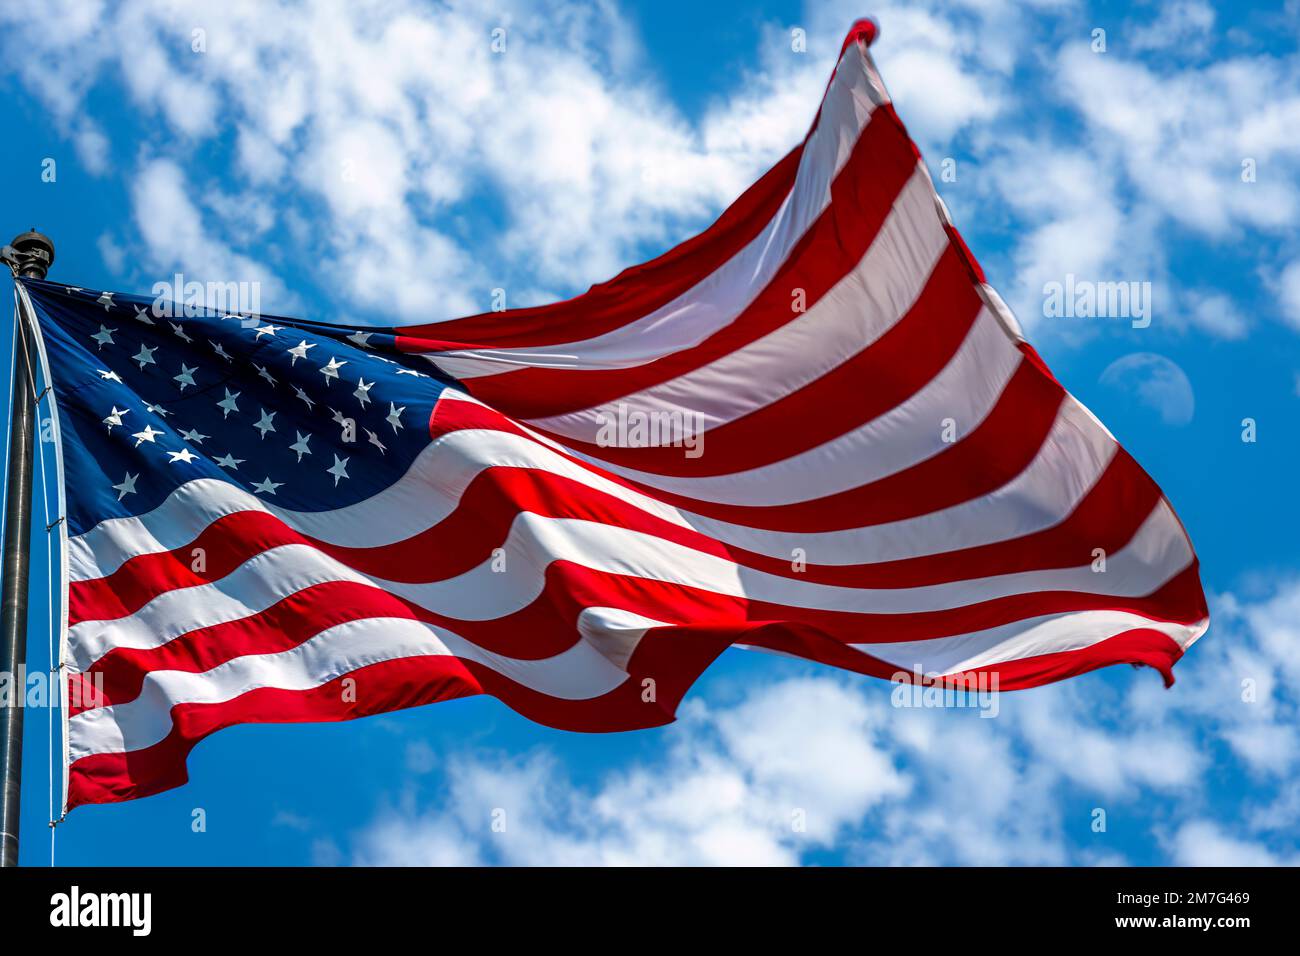 The Stars & Stripes is the national flag of the United States of America. It consists of thirteen equal horizontal stripes of red and white with a blu Stock Photo